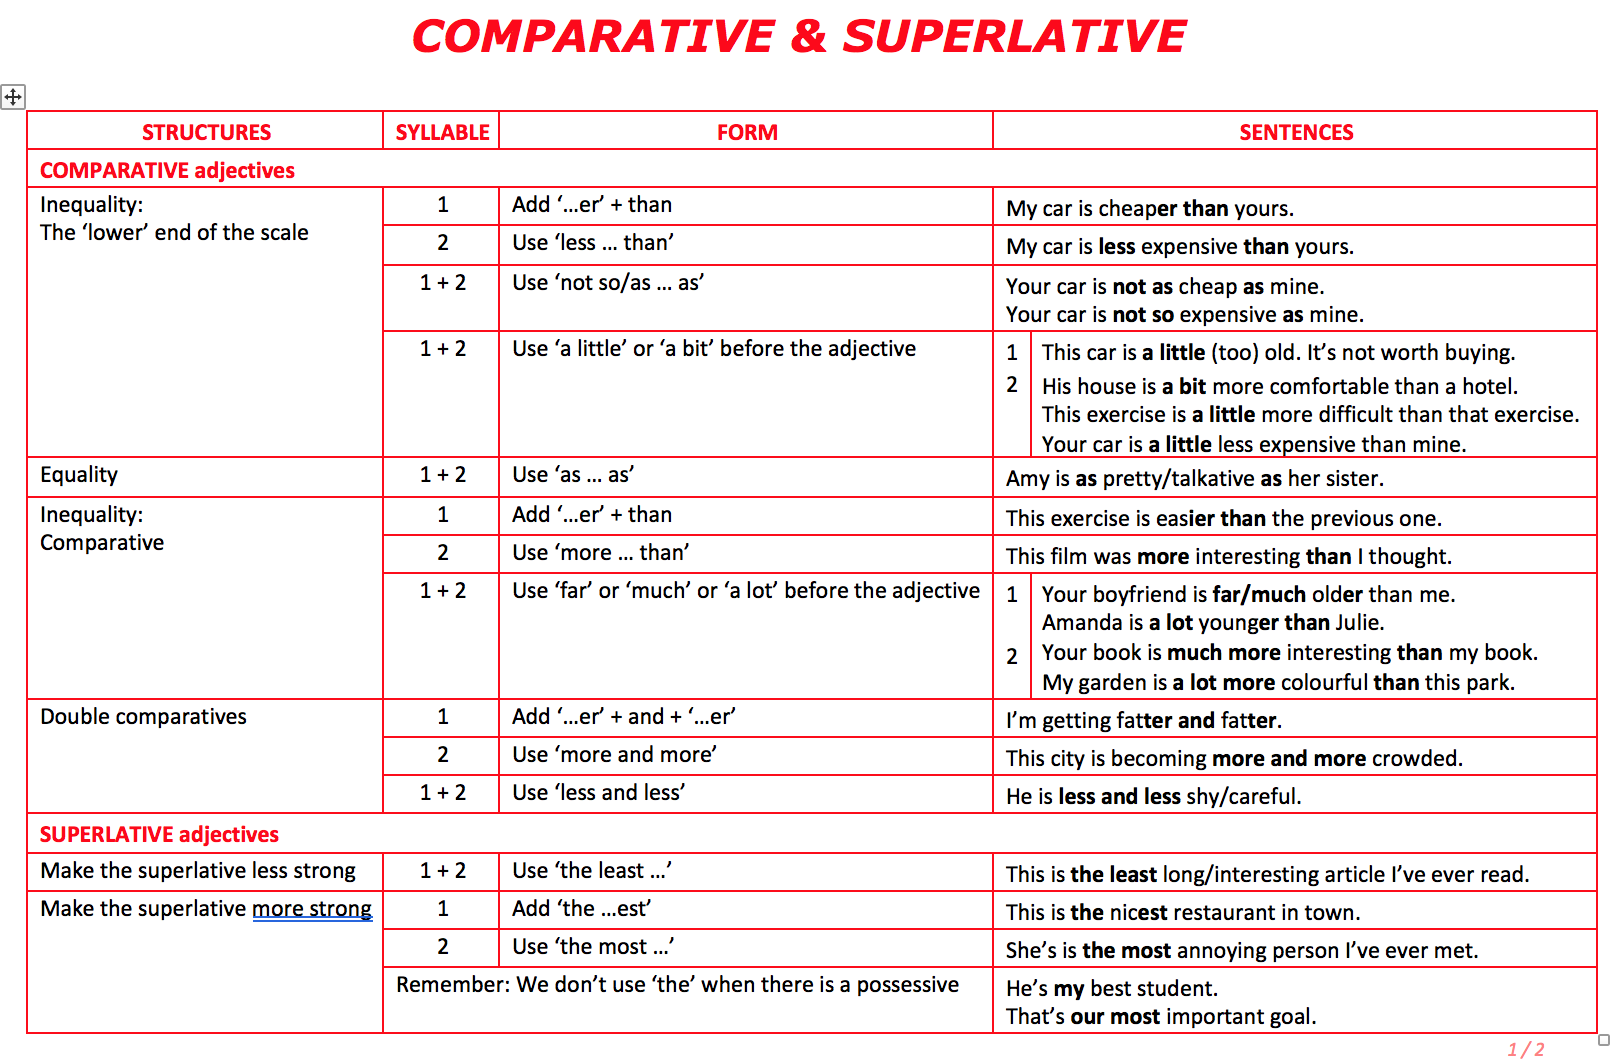 Young comparative and superlative. Comparatives and Superlatives правило. Degrees of Comparison of adjectives правило. Comparatives and Superlatives Rule. Adjective Comparative Superlative таблица.